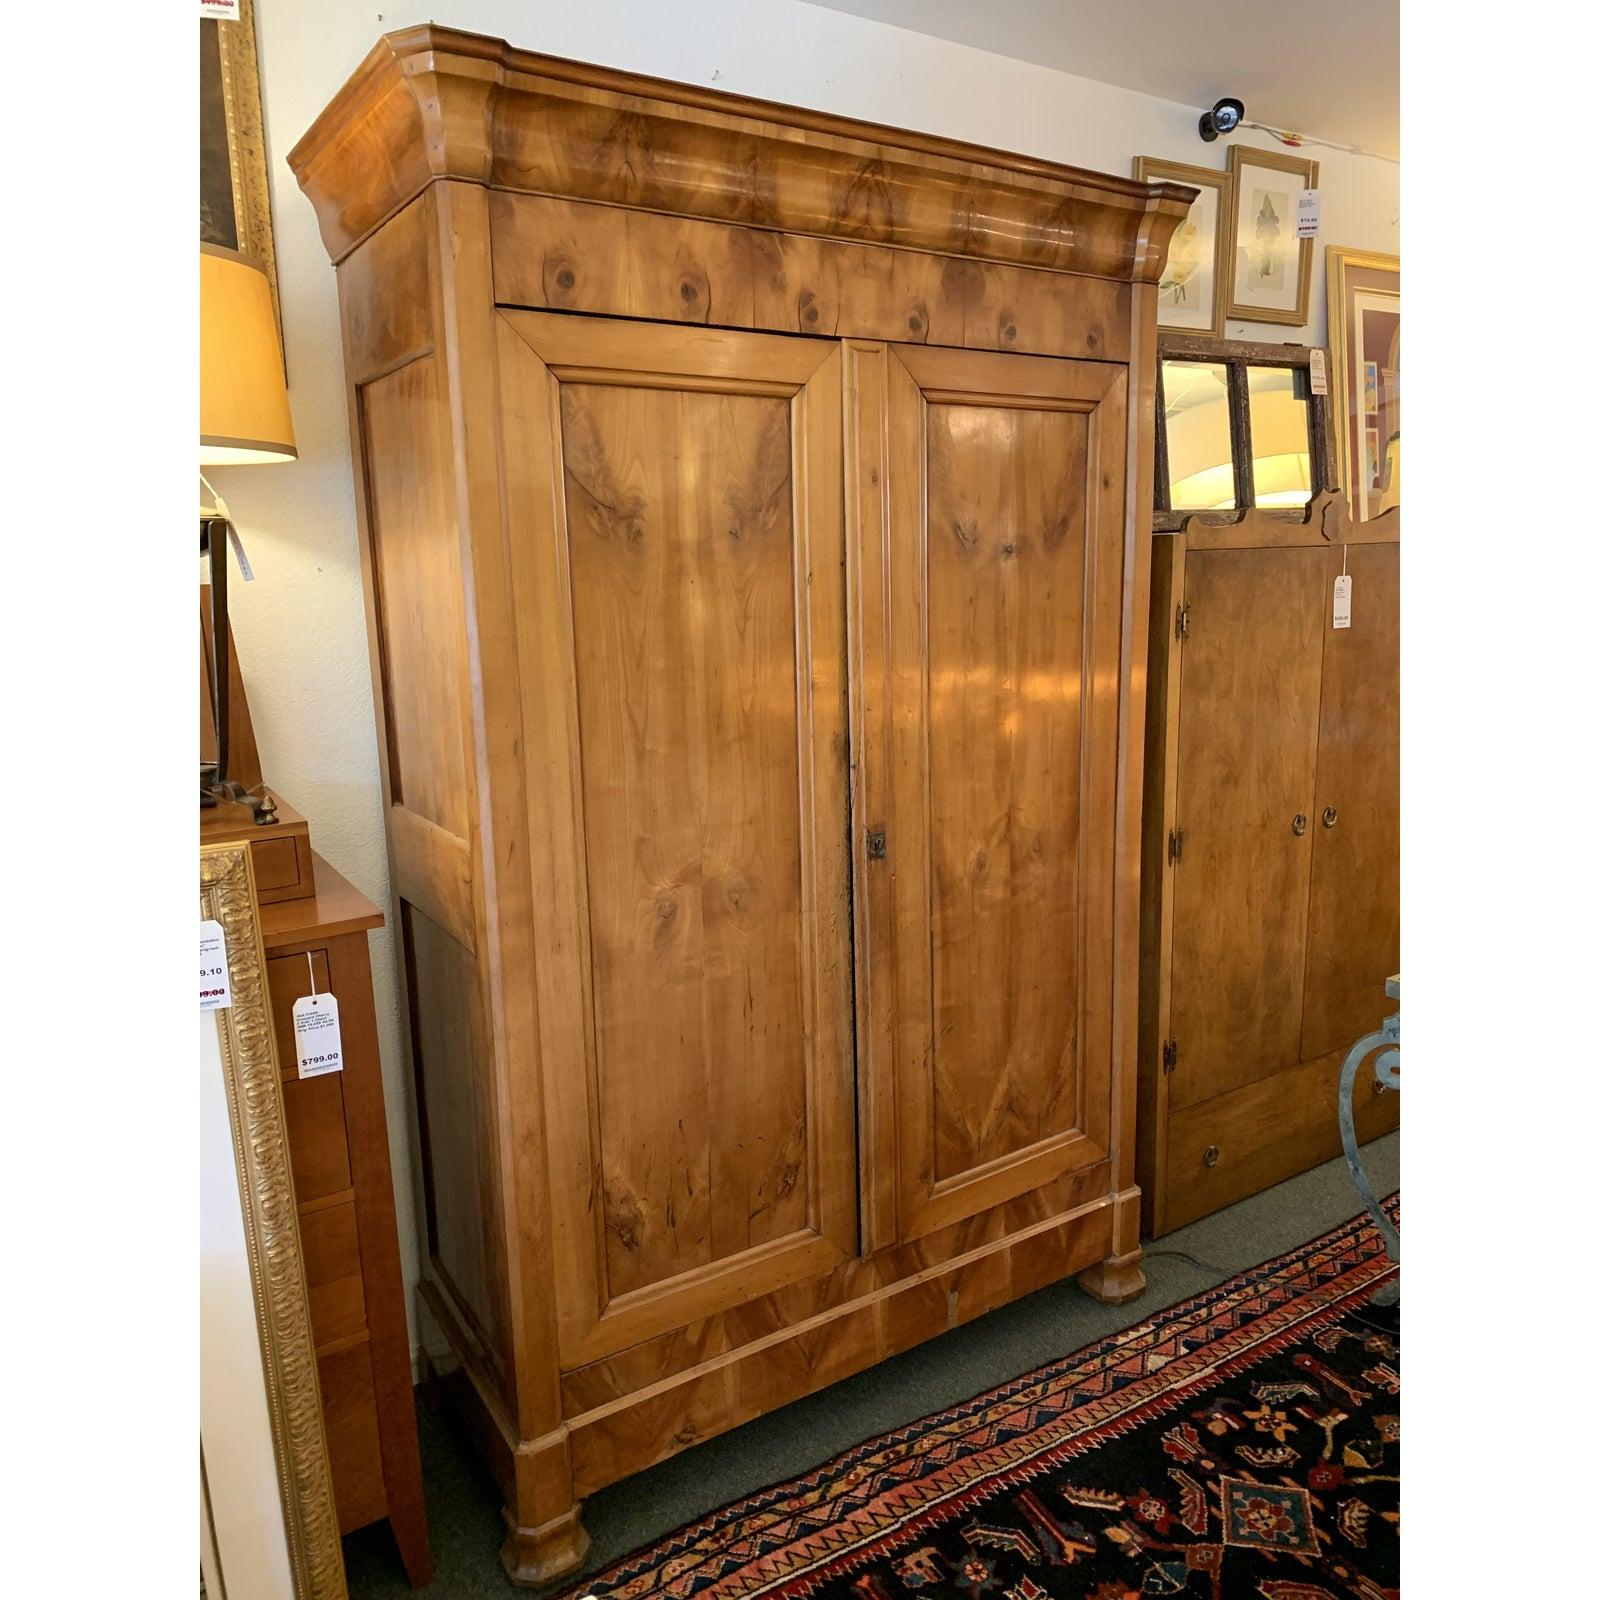 A beautiful Antique Armoire. Beautiful burls draw the eye to the beautiful woodgrain and elegant Silhouette. Two large doors swing open to reveal expansive storage and adjustable shelves and clothes rod. No key available.